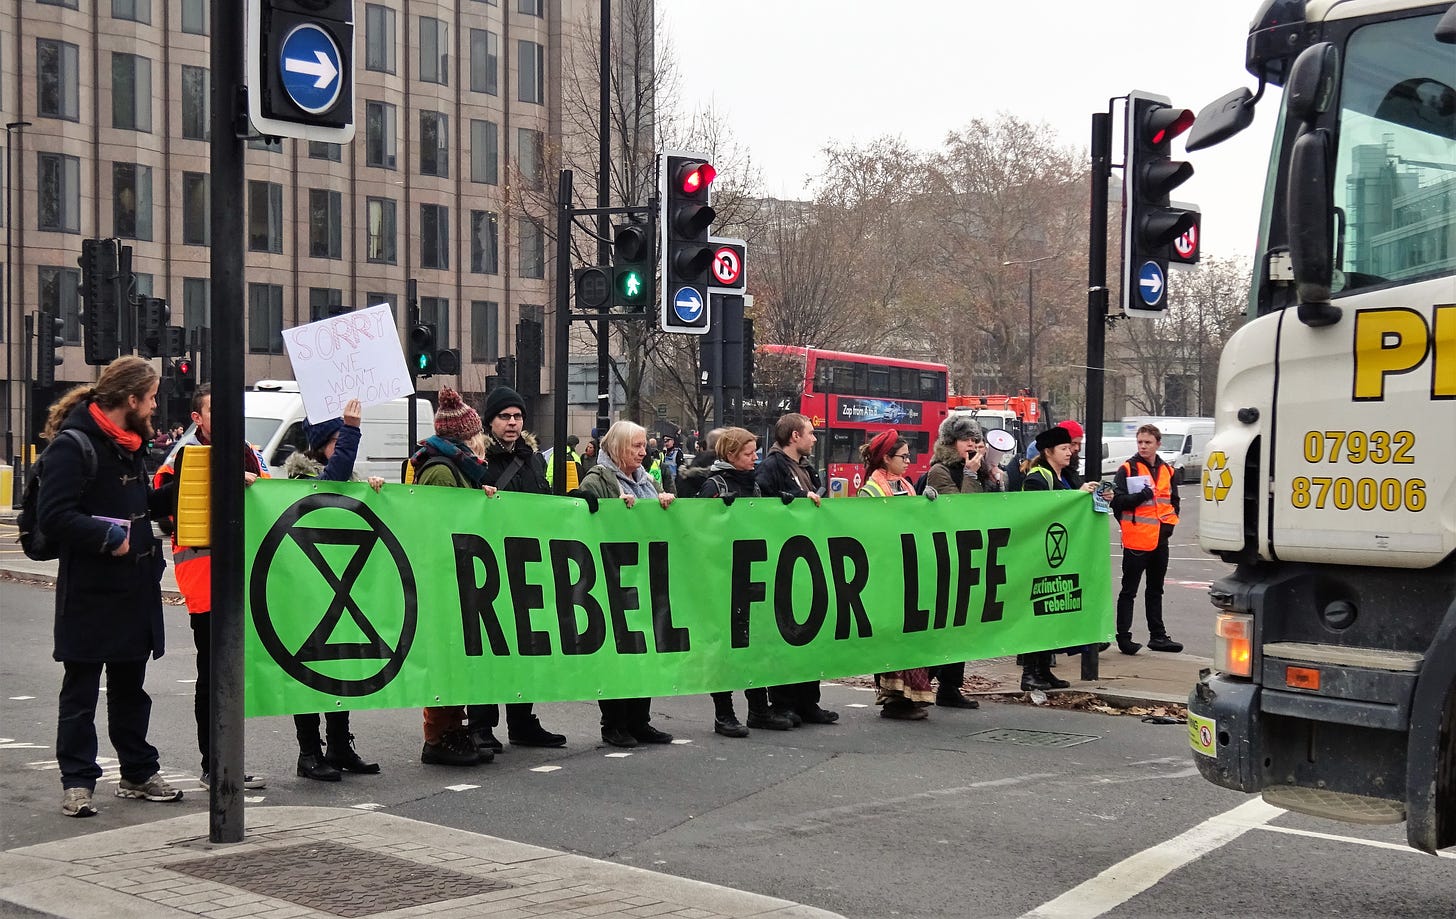 "File:London November 23 2018 (19) Extinction Rebellion Protest Tower Hill.jpg" by DAVID HOLT is licensed under CC BY 2.0